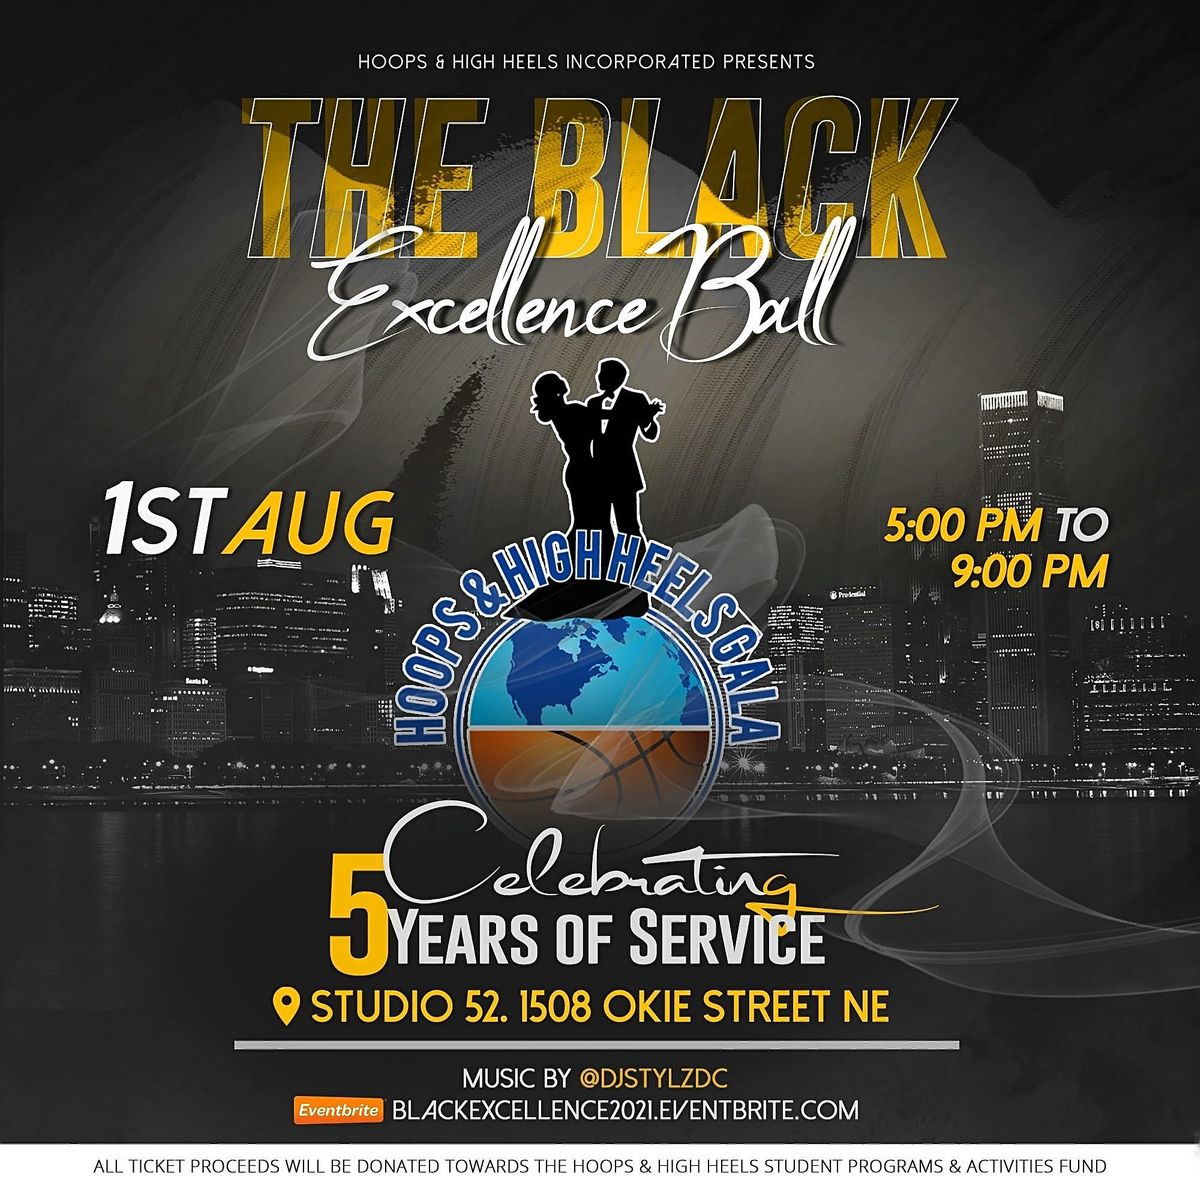 The Black Excellence Ball: Celebrating 5 Years of Service